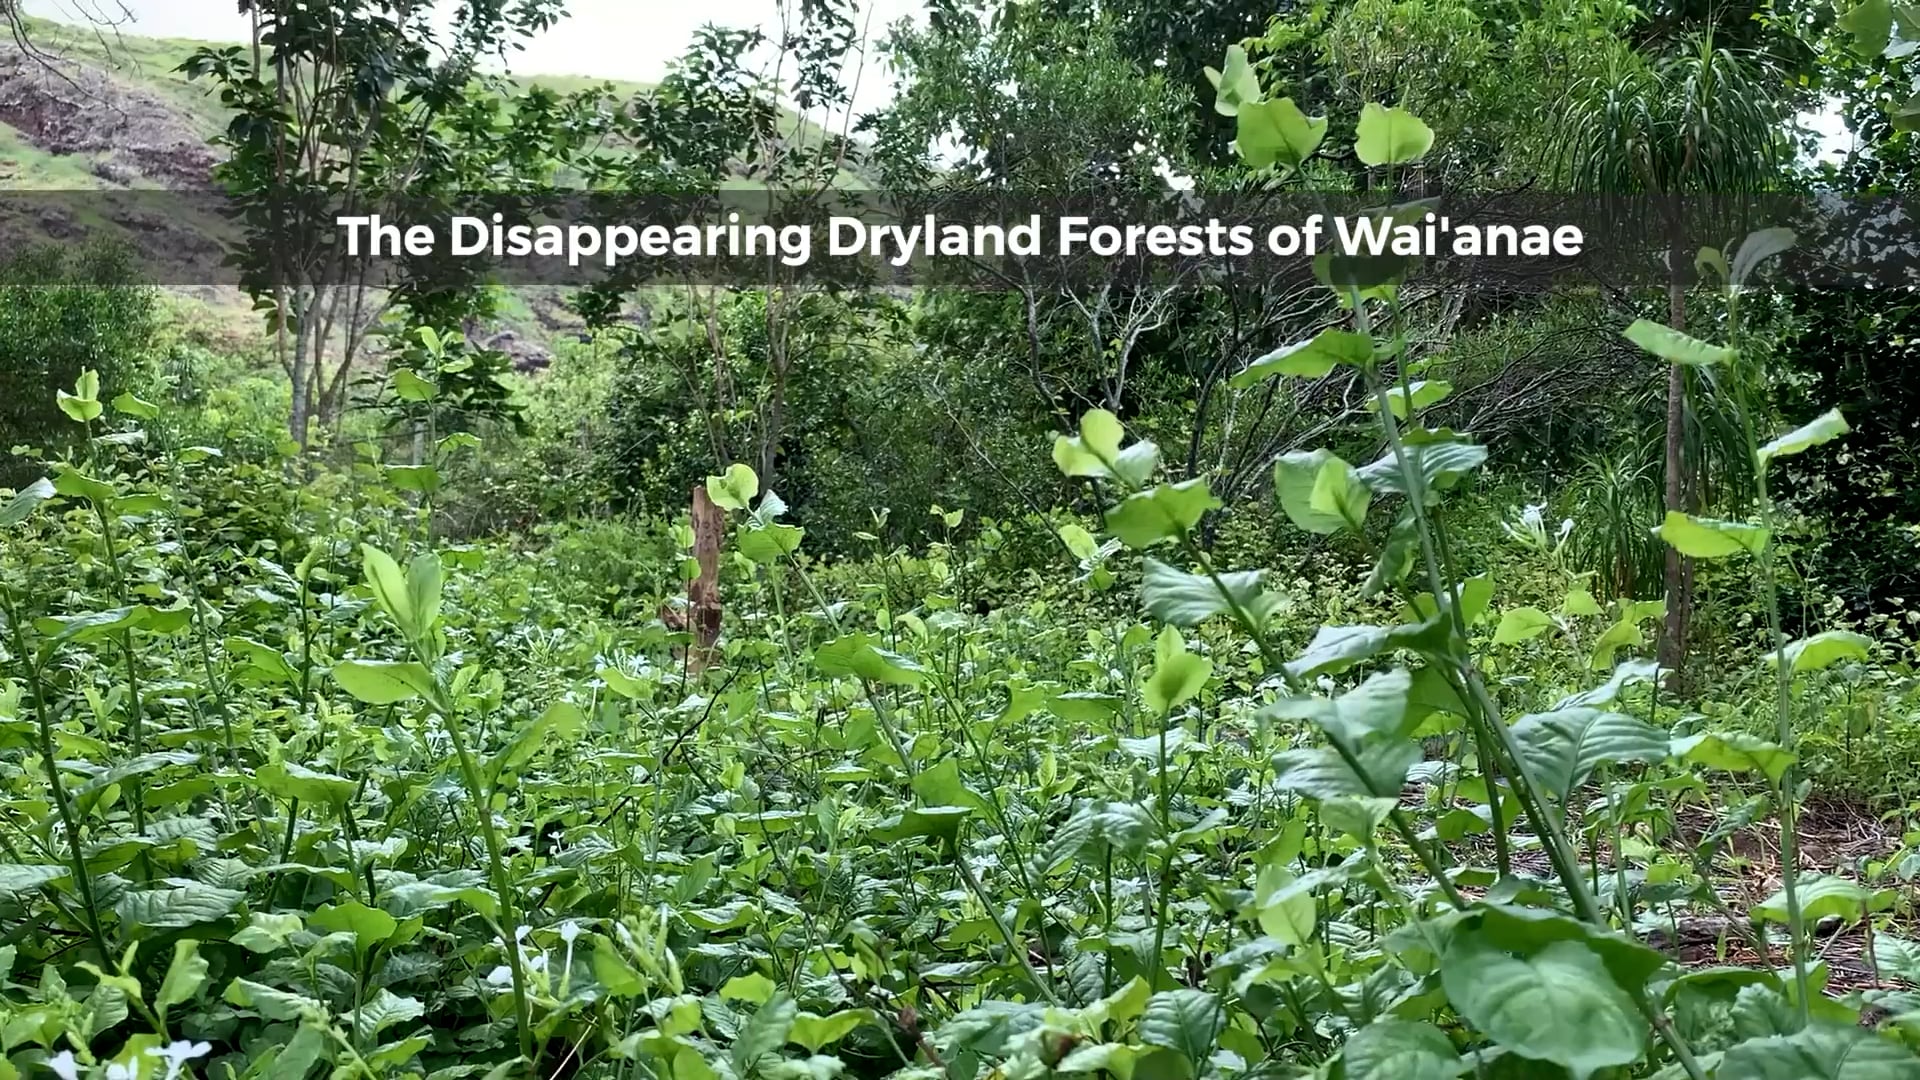 The Disappearing Dryland Forests of Wai'anae (1)